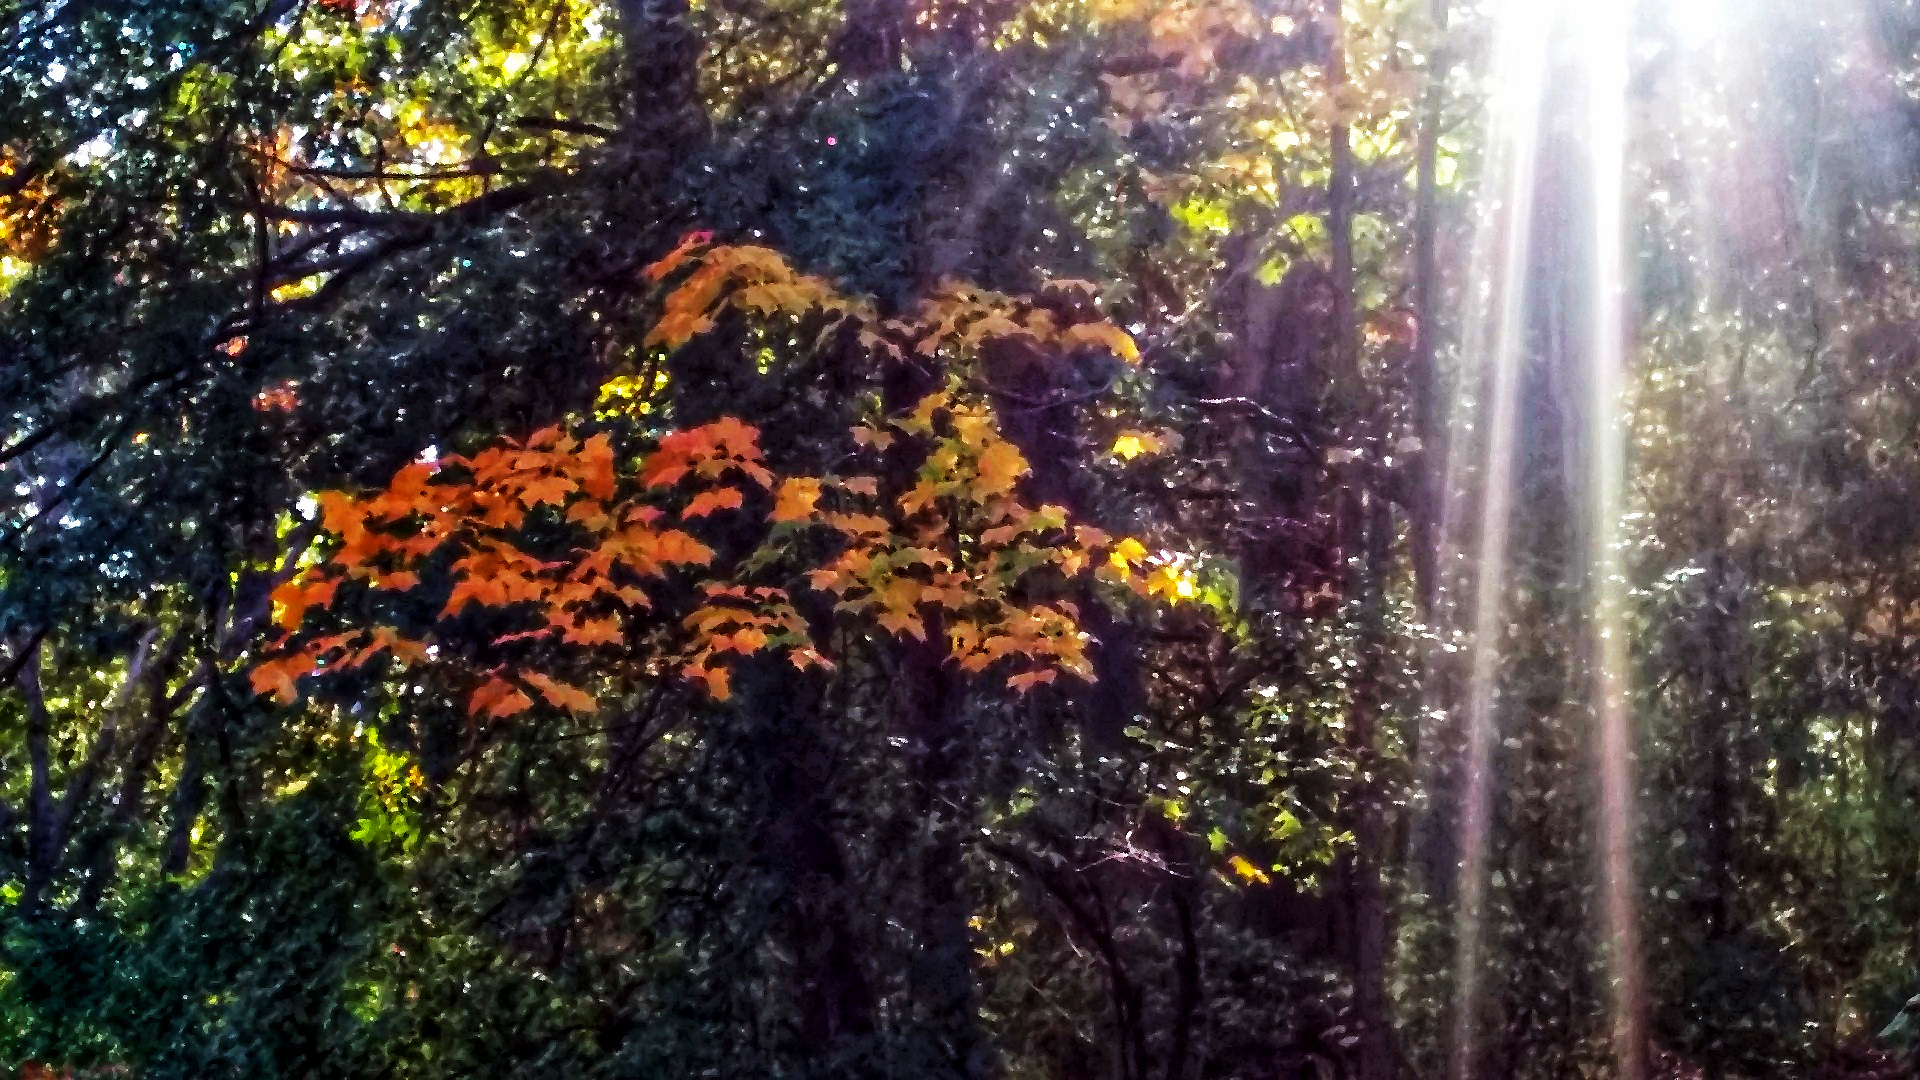 Medium-angle photgraph, manipulated to look like a painting, shows a cluster of bright orange leaves on a tree, against a backdrop of dark green leaves that are not in direct sunlilight. Tree leaves illuminated by the early afternoon sun can be seen through the trees that are in the foreground. To the right of the orange leaves are sharp, bright streaks of sunlight. The picture has an impressionistic look.